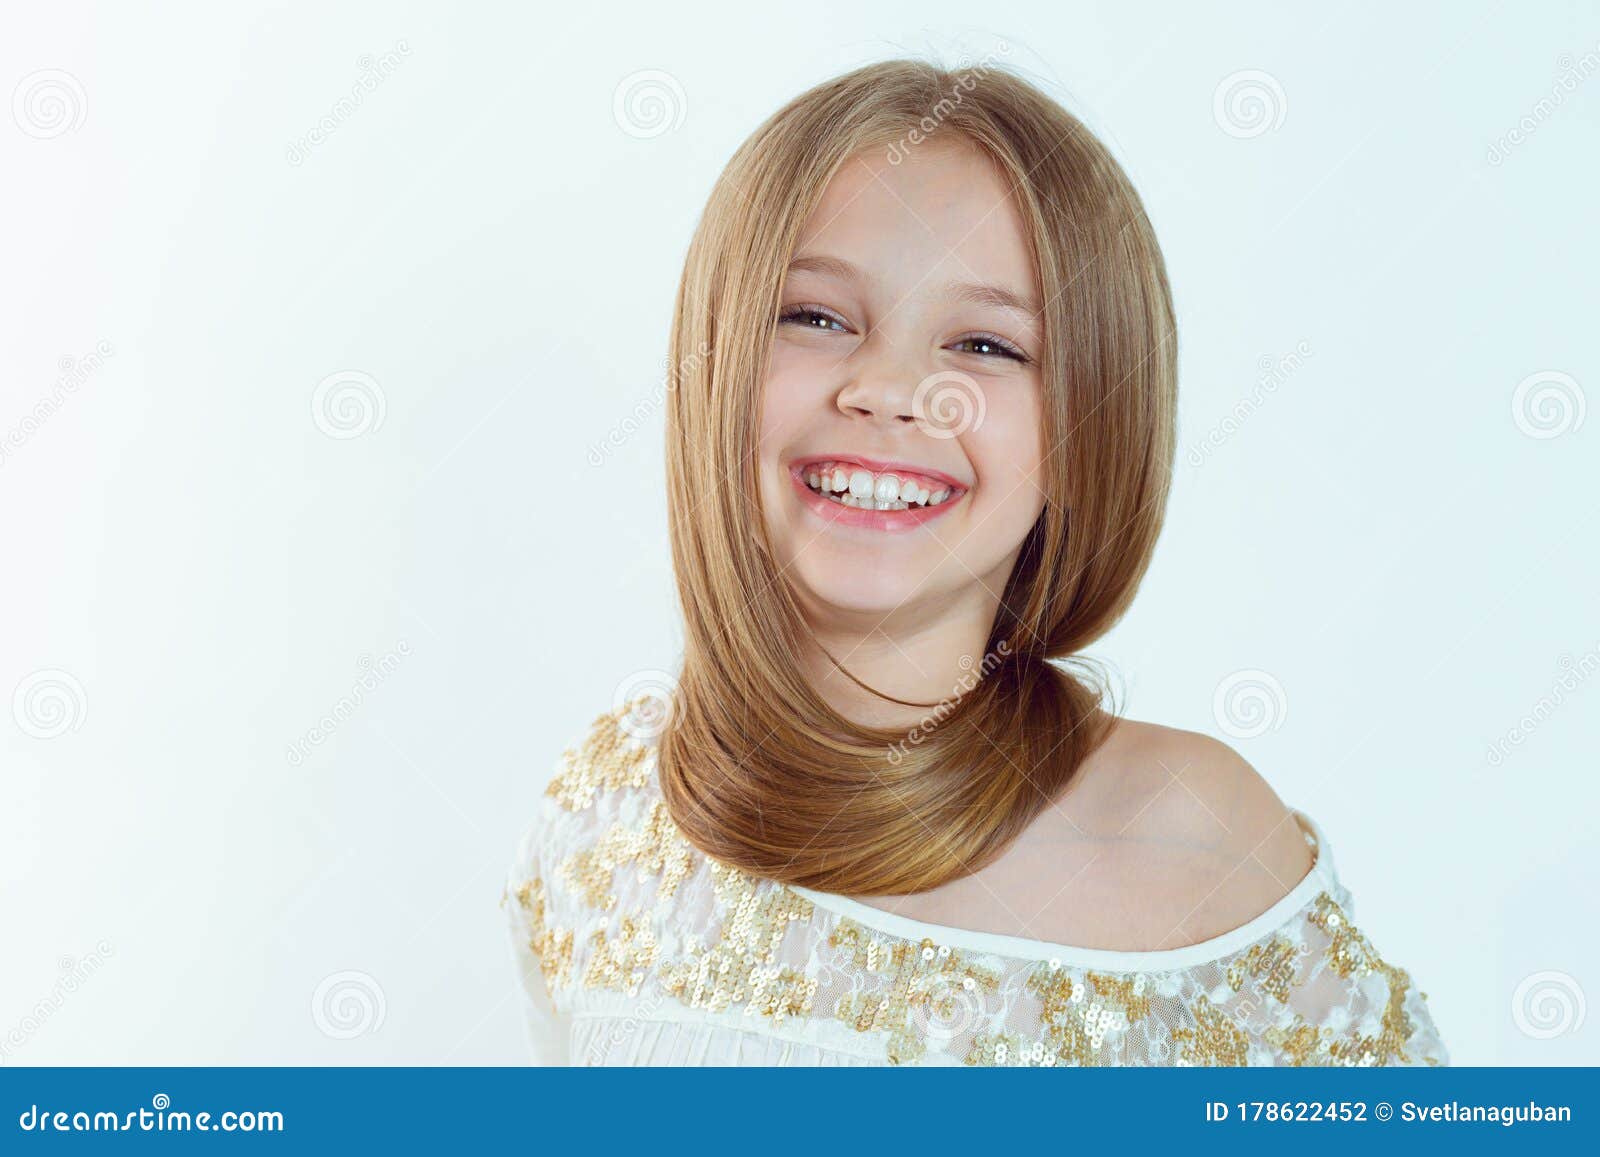 smile, gorgeous. portrait closeup of funny, excited joyful girl female child laughing kid smiling girl long hair looking at you